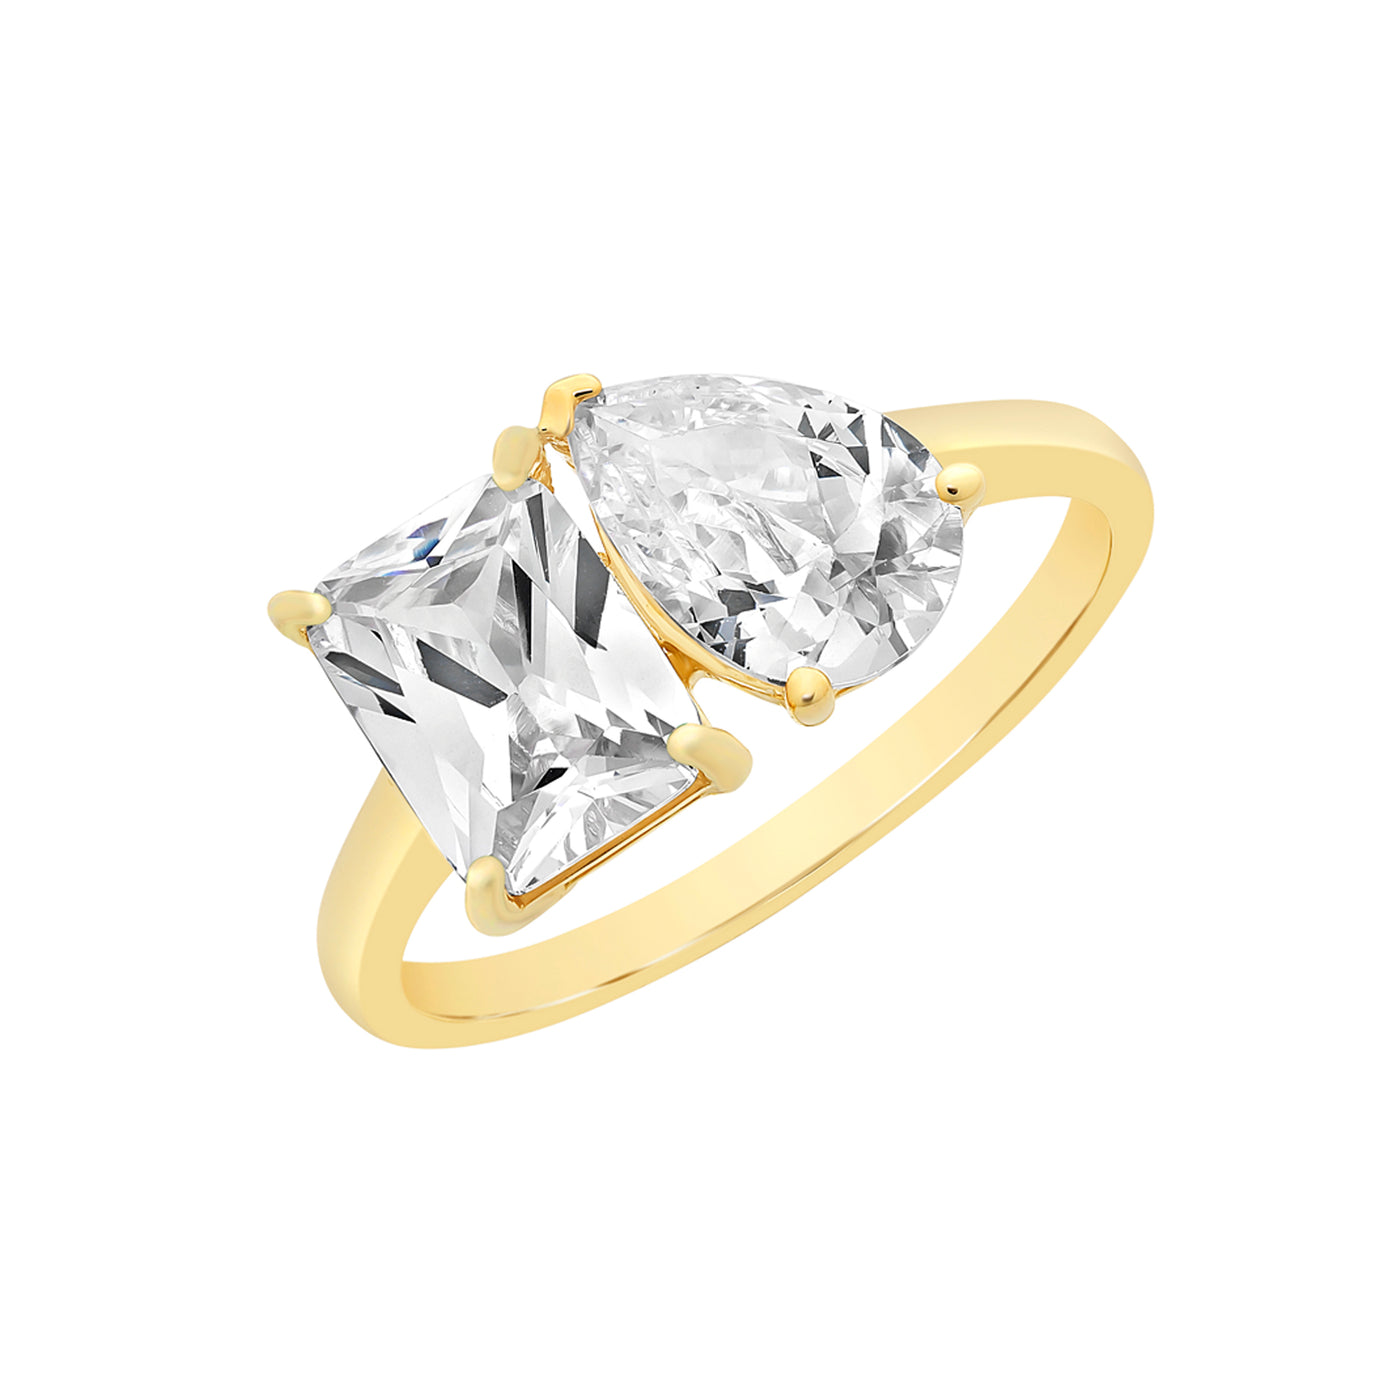 9ct Gold Abstract Cubic Zirconia Dress Ring.